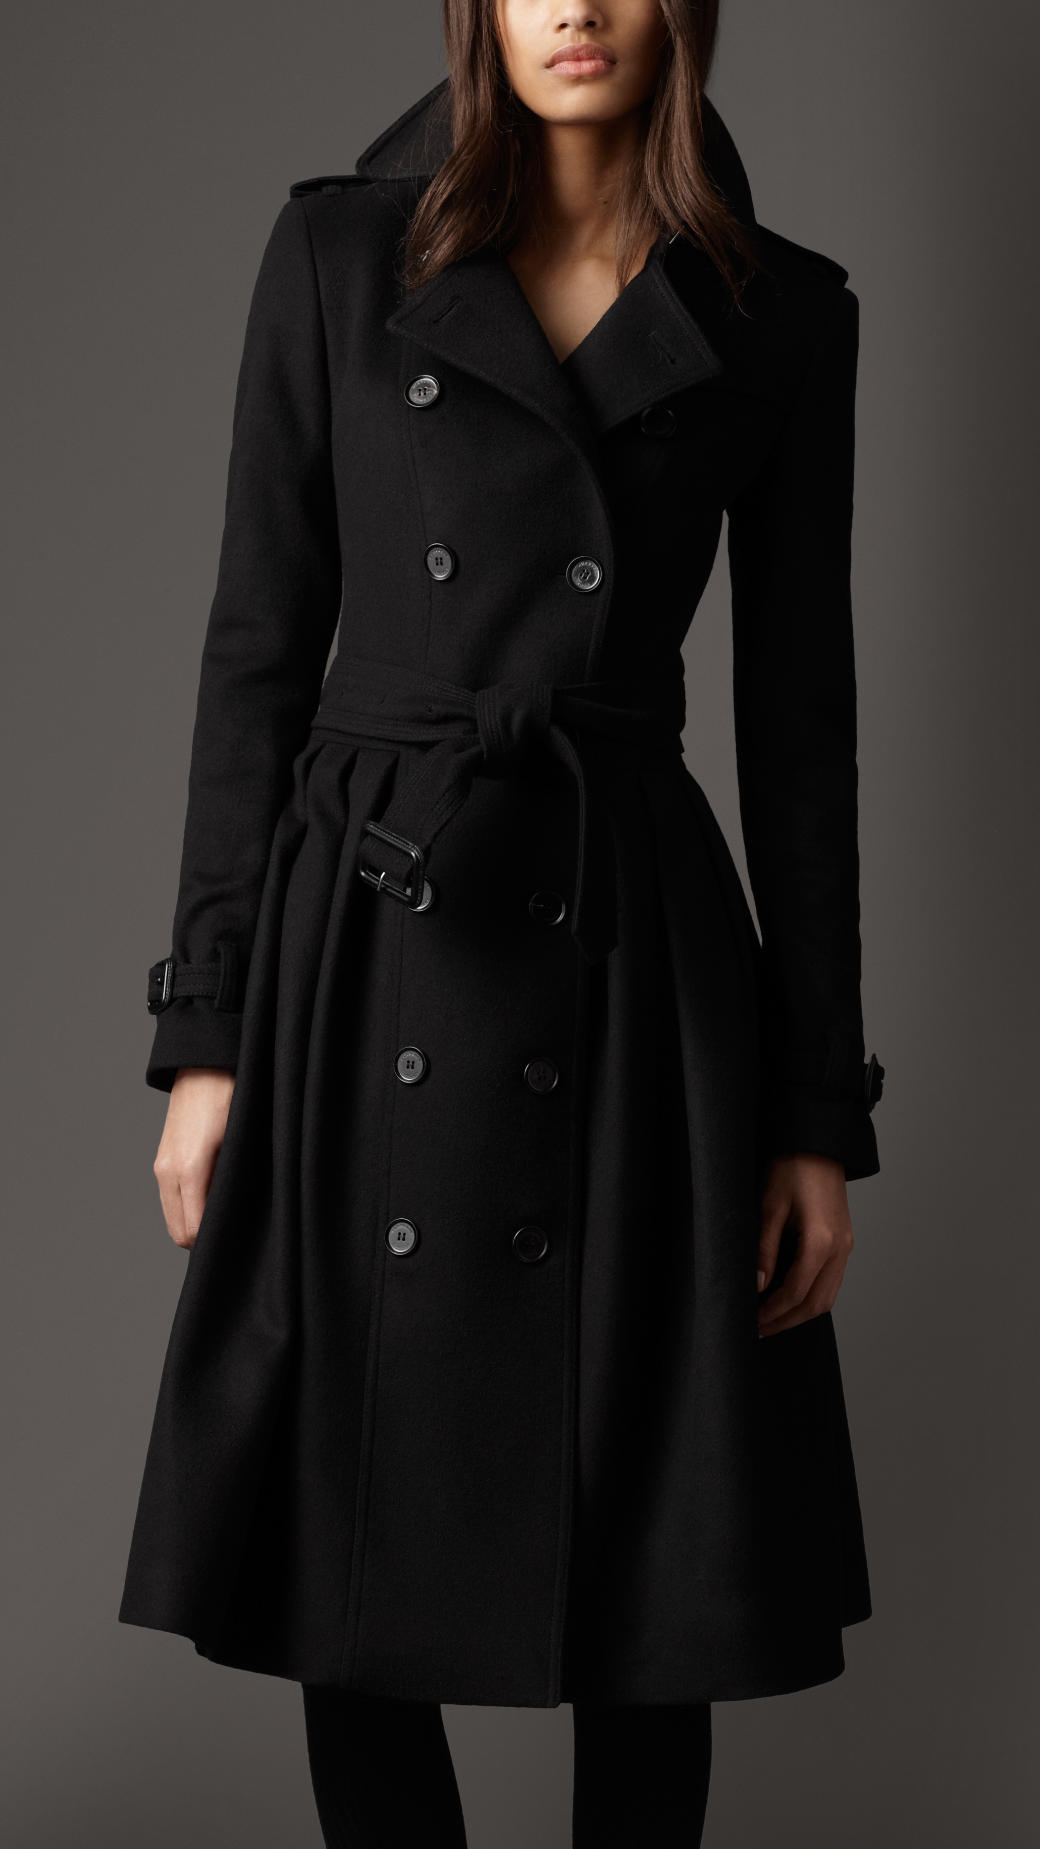 Burberry Full Skirt Virgin Wool and Cashmere Coat in Black | Lyst